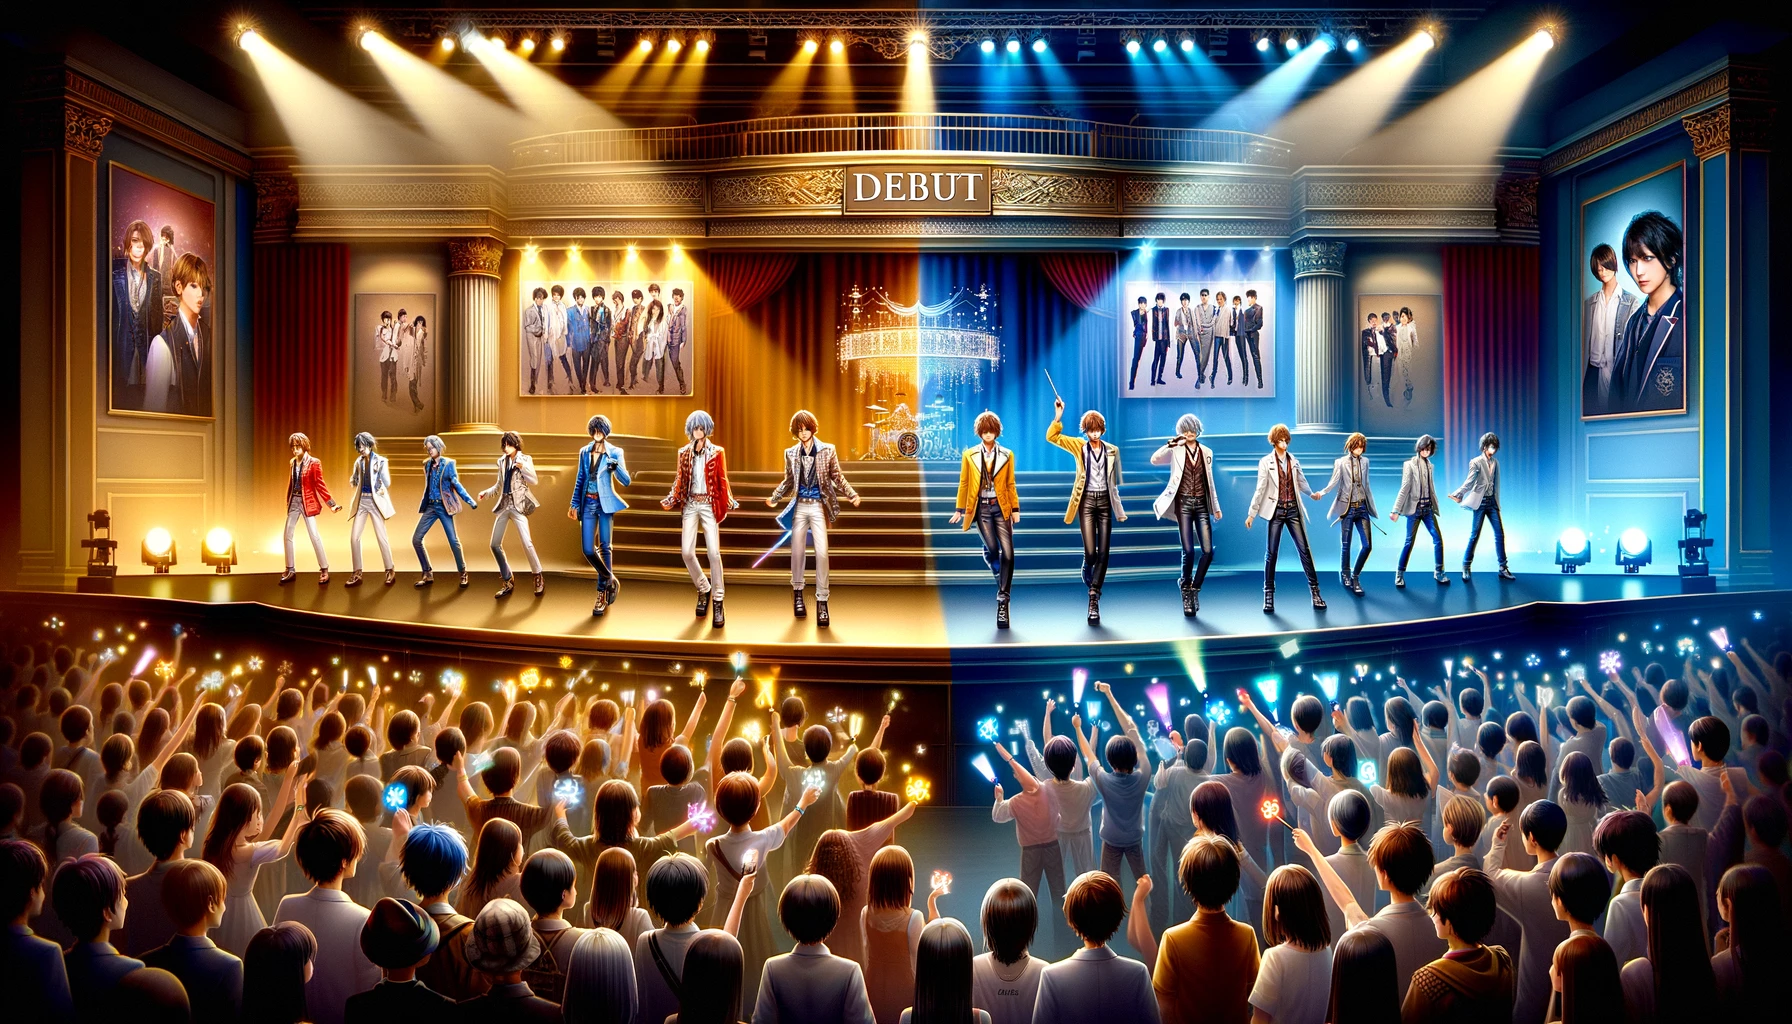 An exciting scene depicting the debut event of two new Japanese male idol groups at the same venue. The scene shows a split stage, with each group performing their debut songs. On the left, one group wears colorful, modern pop outfits, and on the right, the other group is dressed in classic, elegant attire. The atmosphere is festive, with a crowd of fans waving light sticks and banners. Above the stage, a large banner reads 'Debut Live Concert'. The setting is a large concert hall with sophisticated lighting and decor.